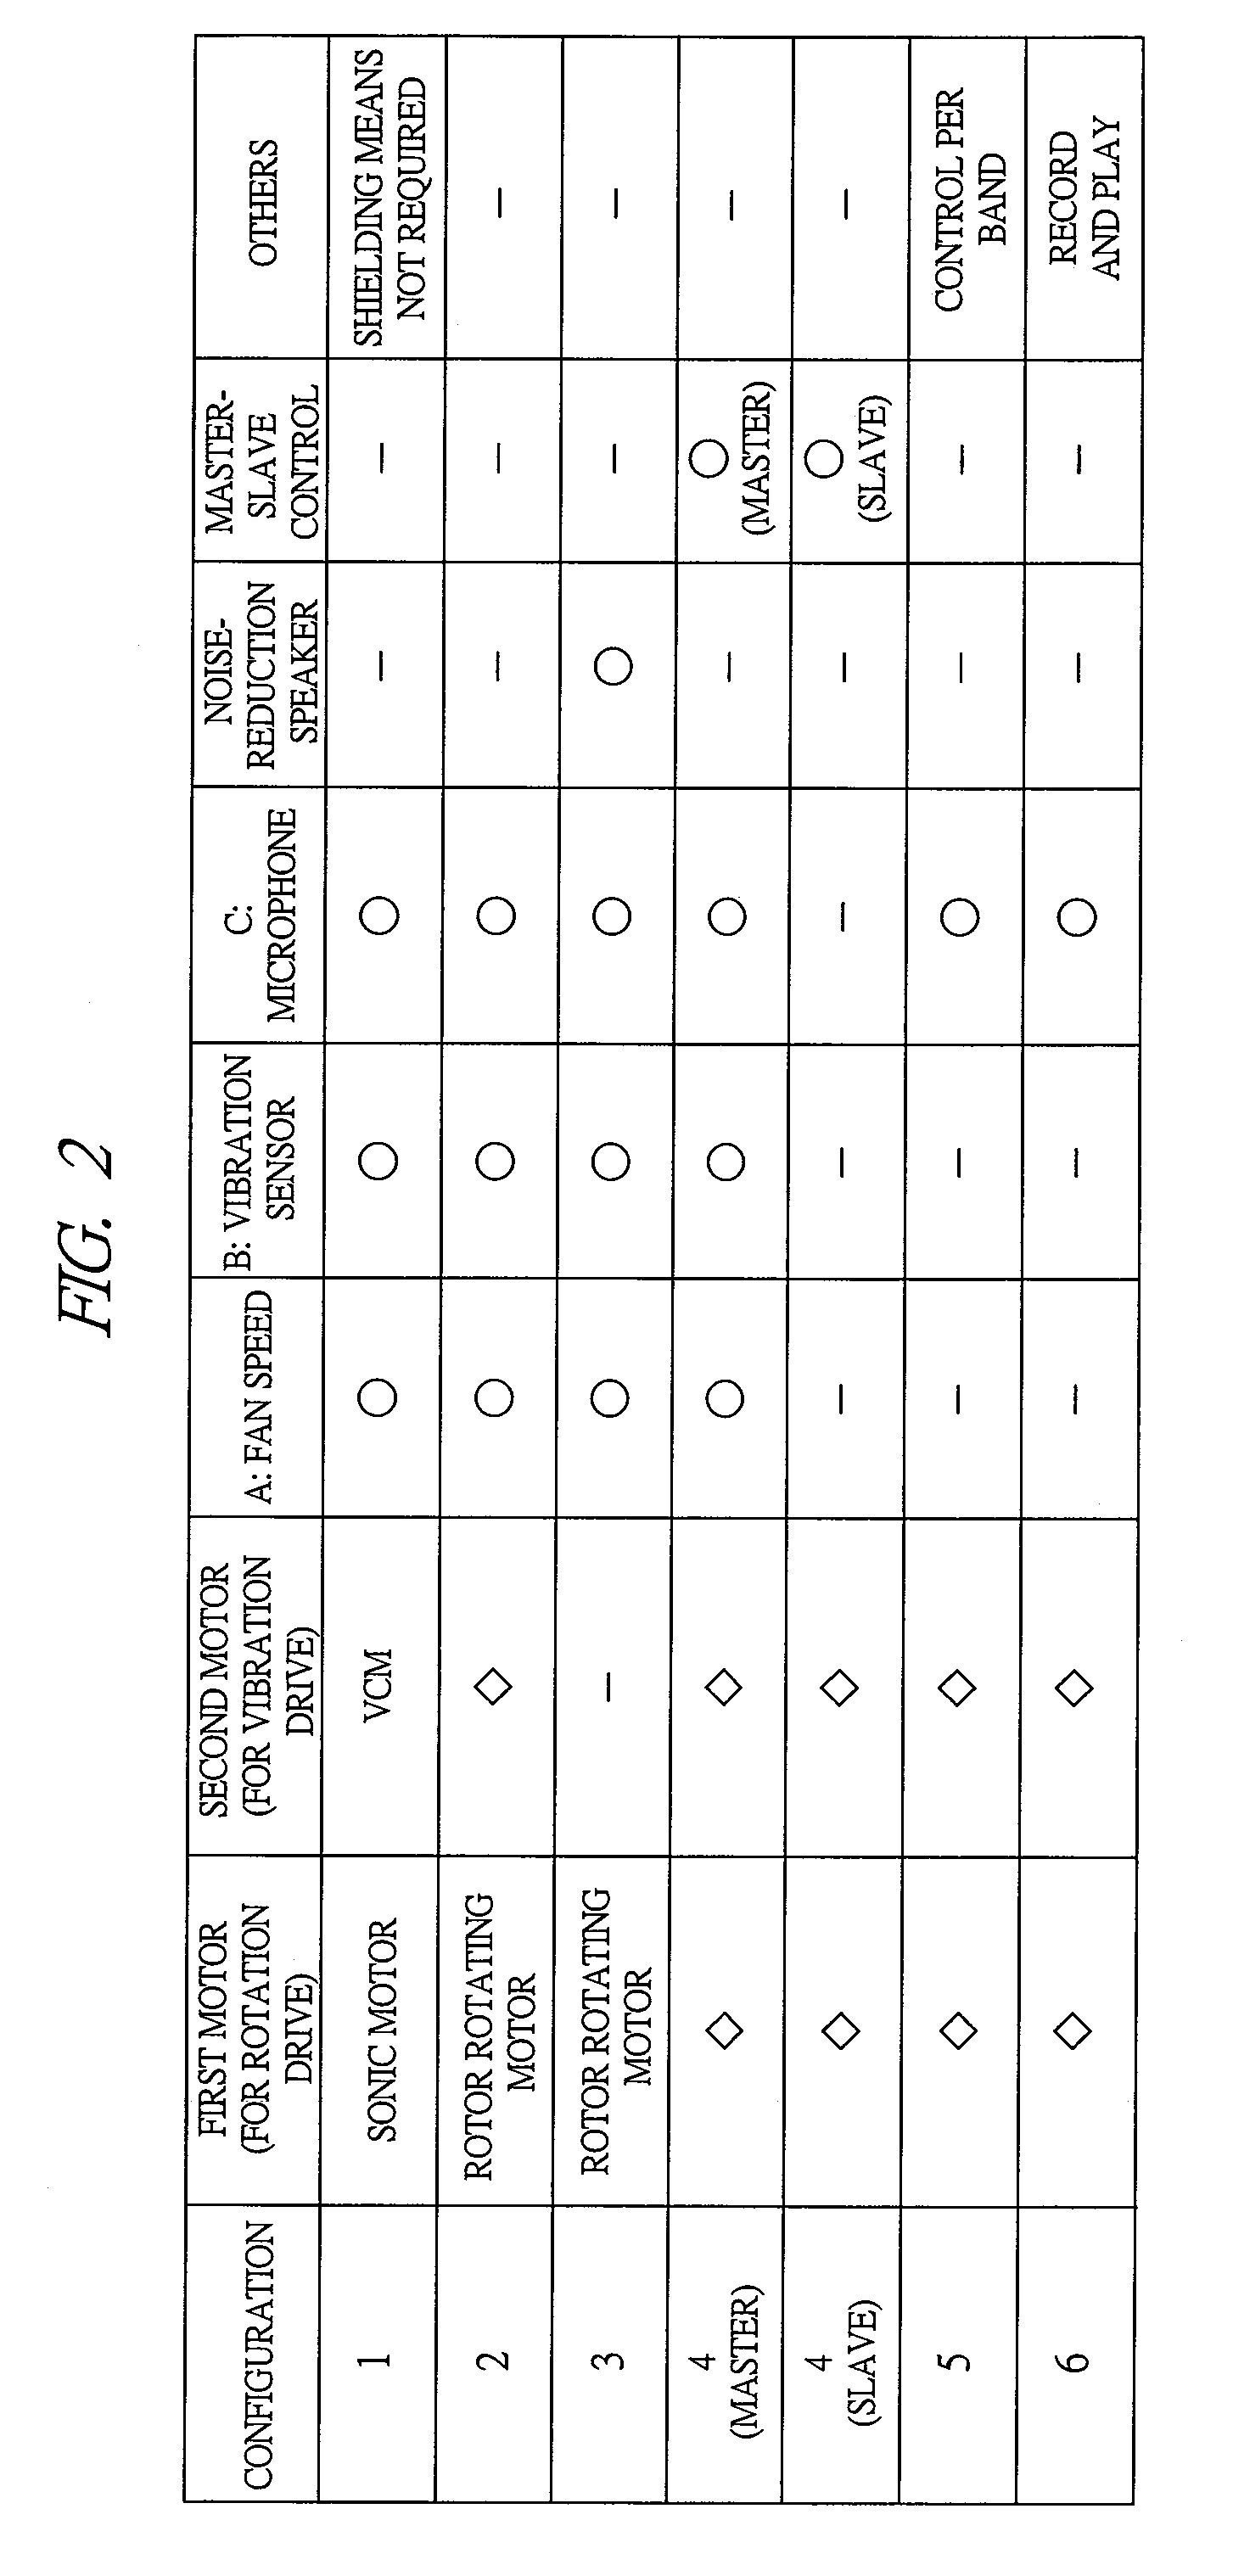 Electronic device having a blower with noise control